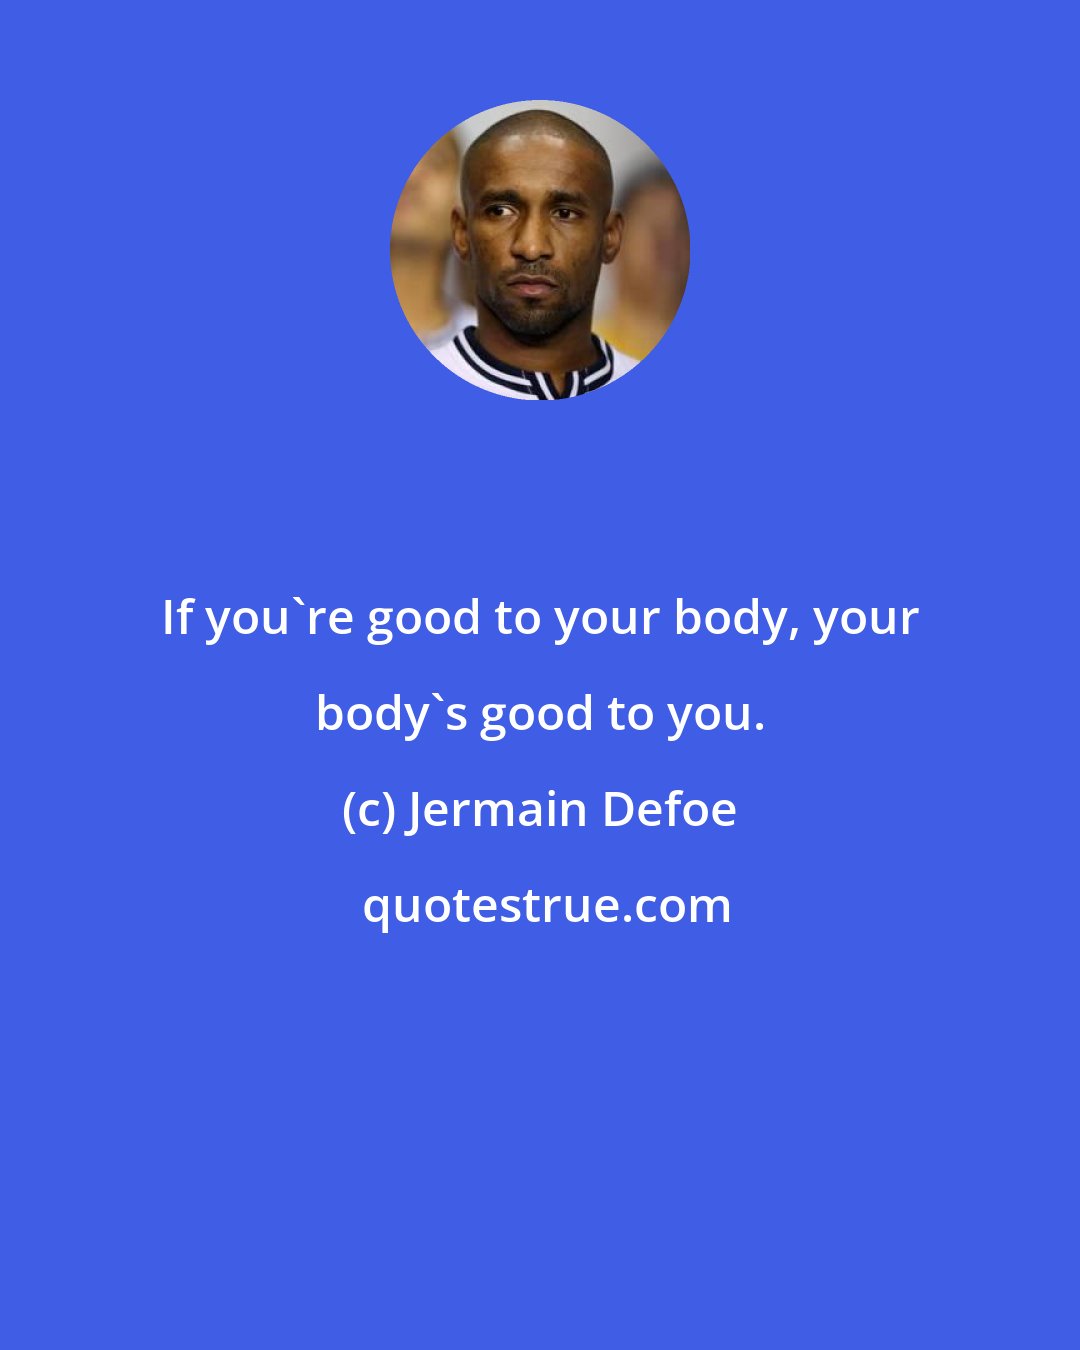 Jermain Defoe: If you're good to your body, your body's good to you.